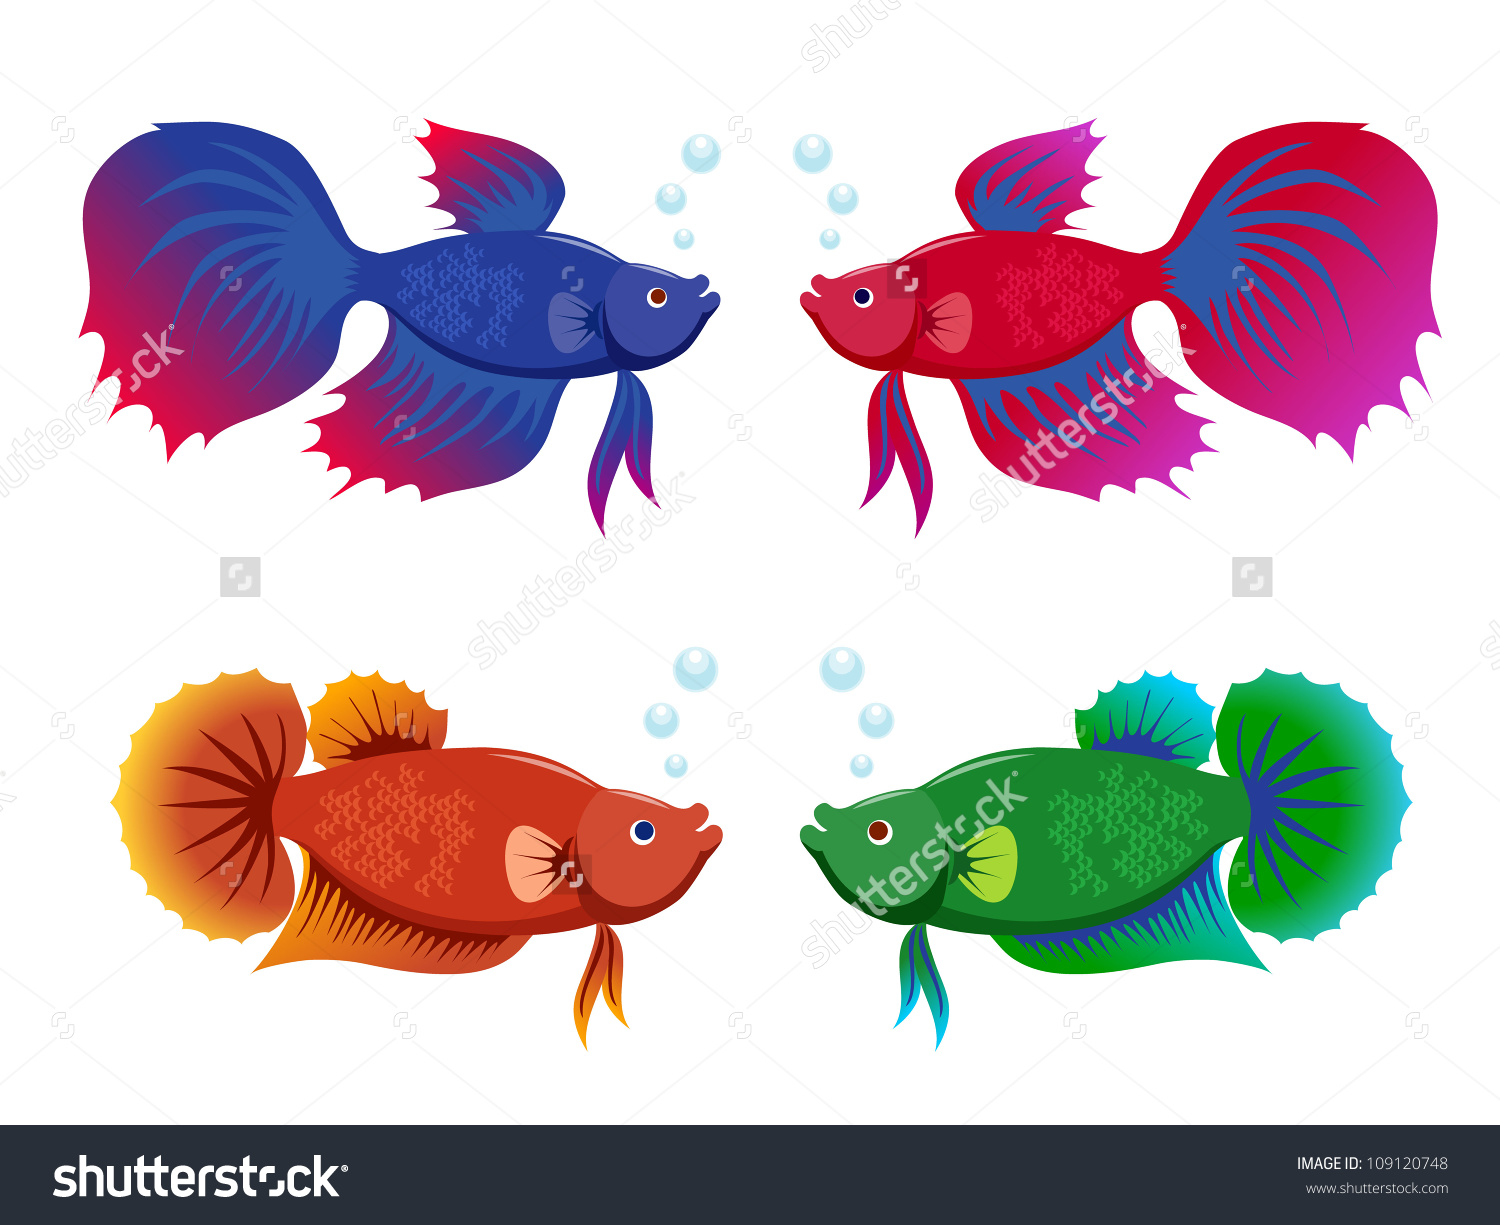 Siamese Fighting Fish svg #14, Download drawings